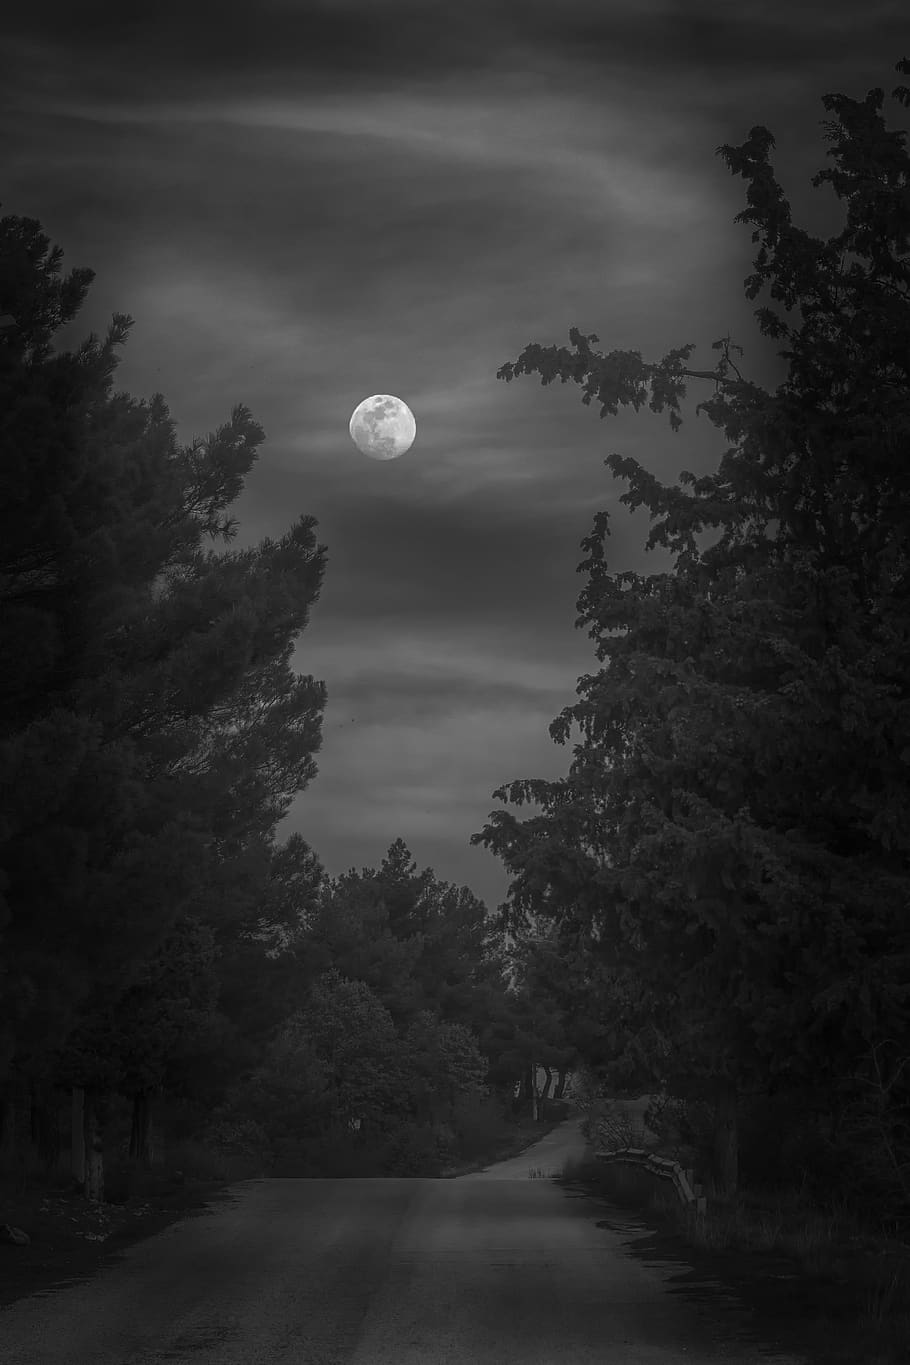 moon, bw, atmosphere, mystical, clouds, mood, fantasy, fields, tree, surreal